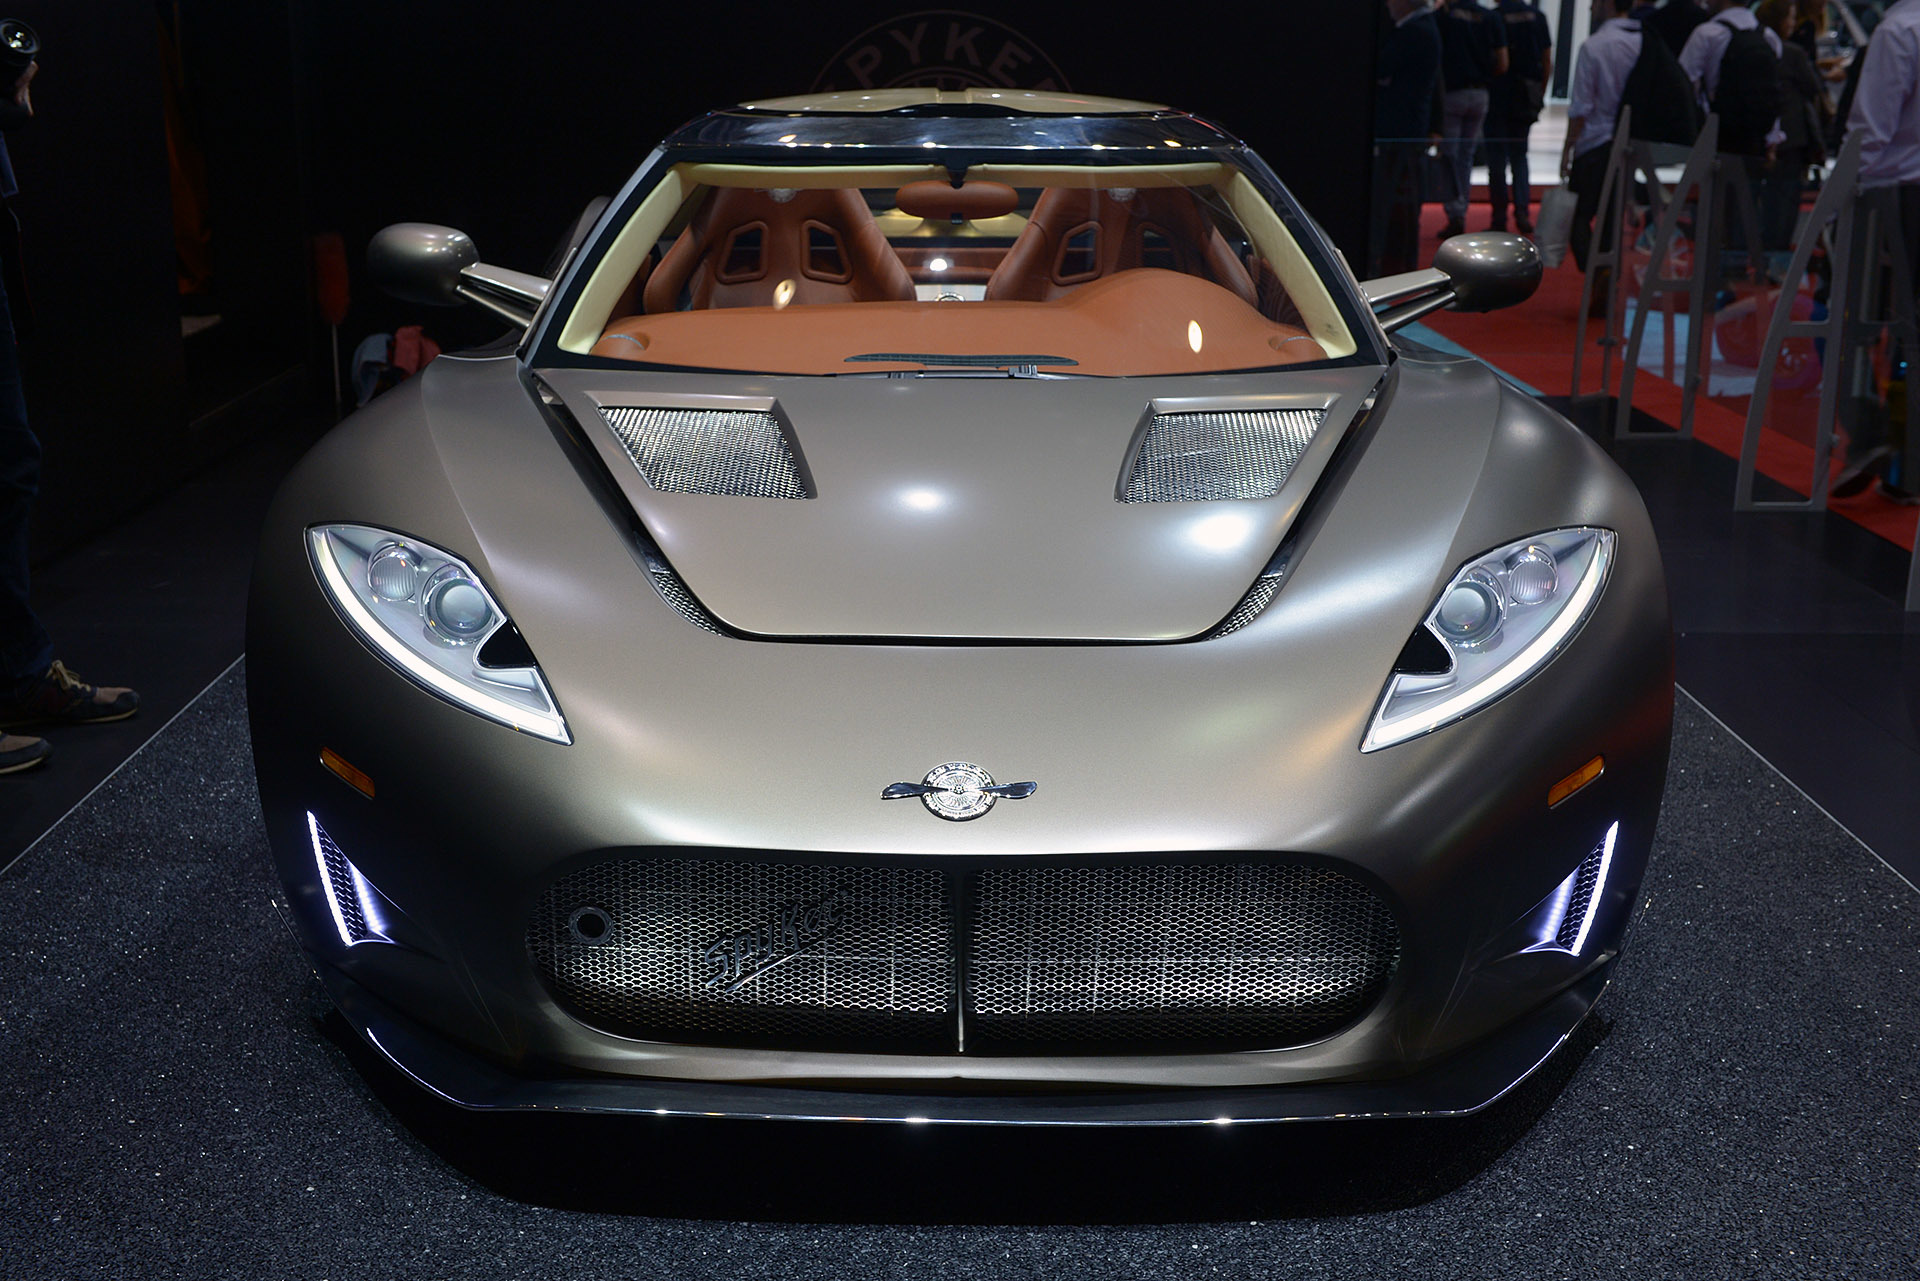 Is the Spyker C8 Preliator worth the $354,900 price tag? - Autoblog